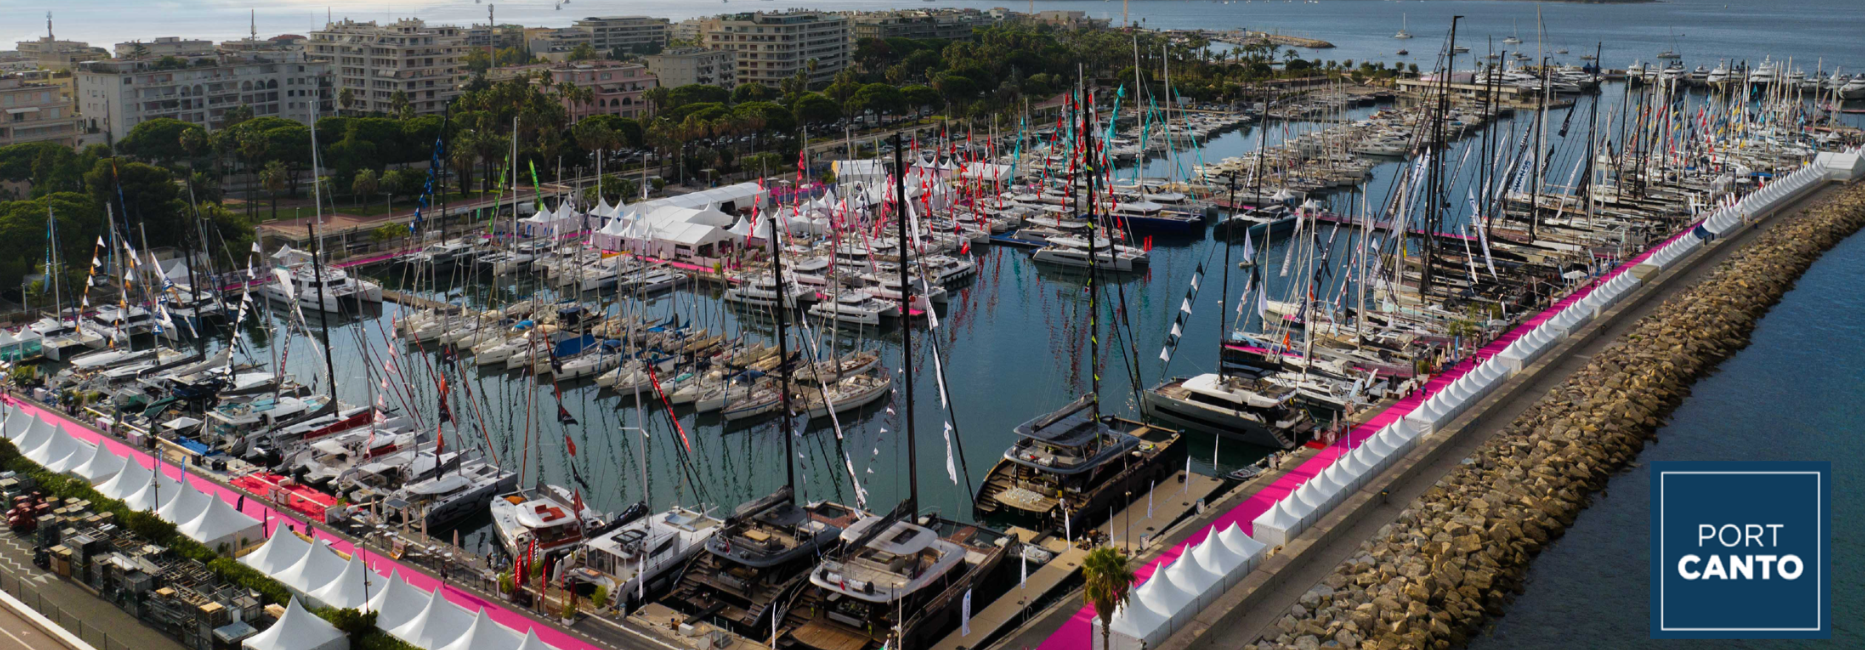 Port Canto at Cannes Yachting Festival